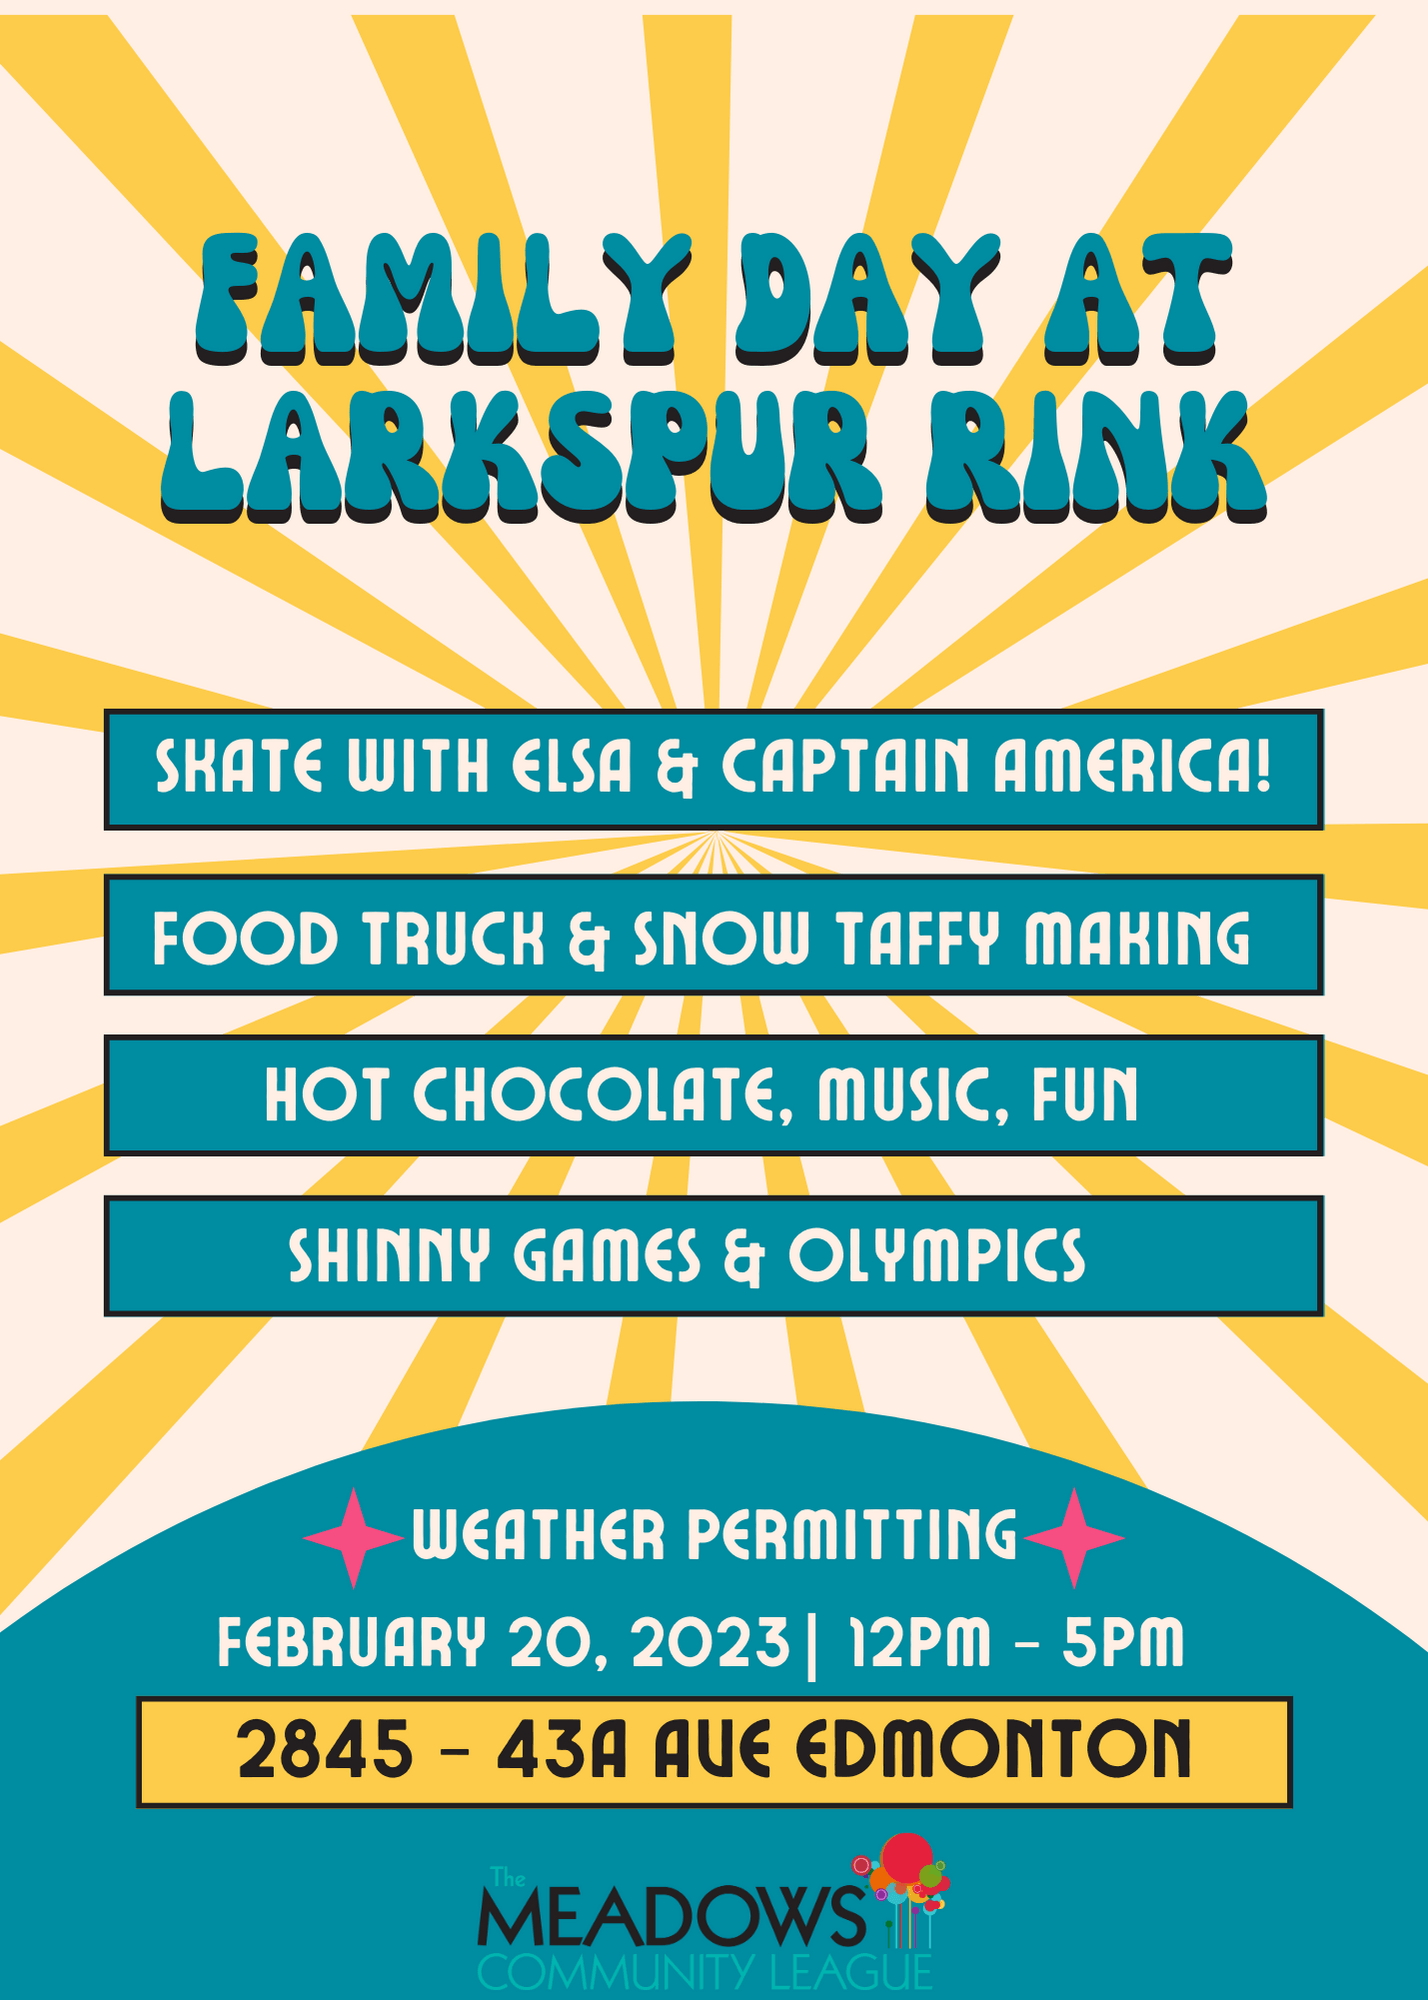 Family Day Larkspur Rink The Meadows Community League